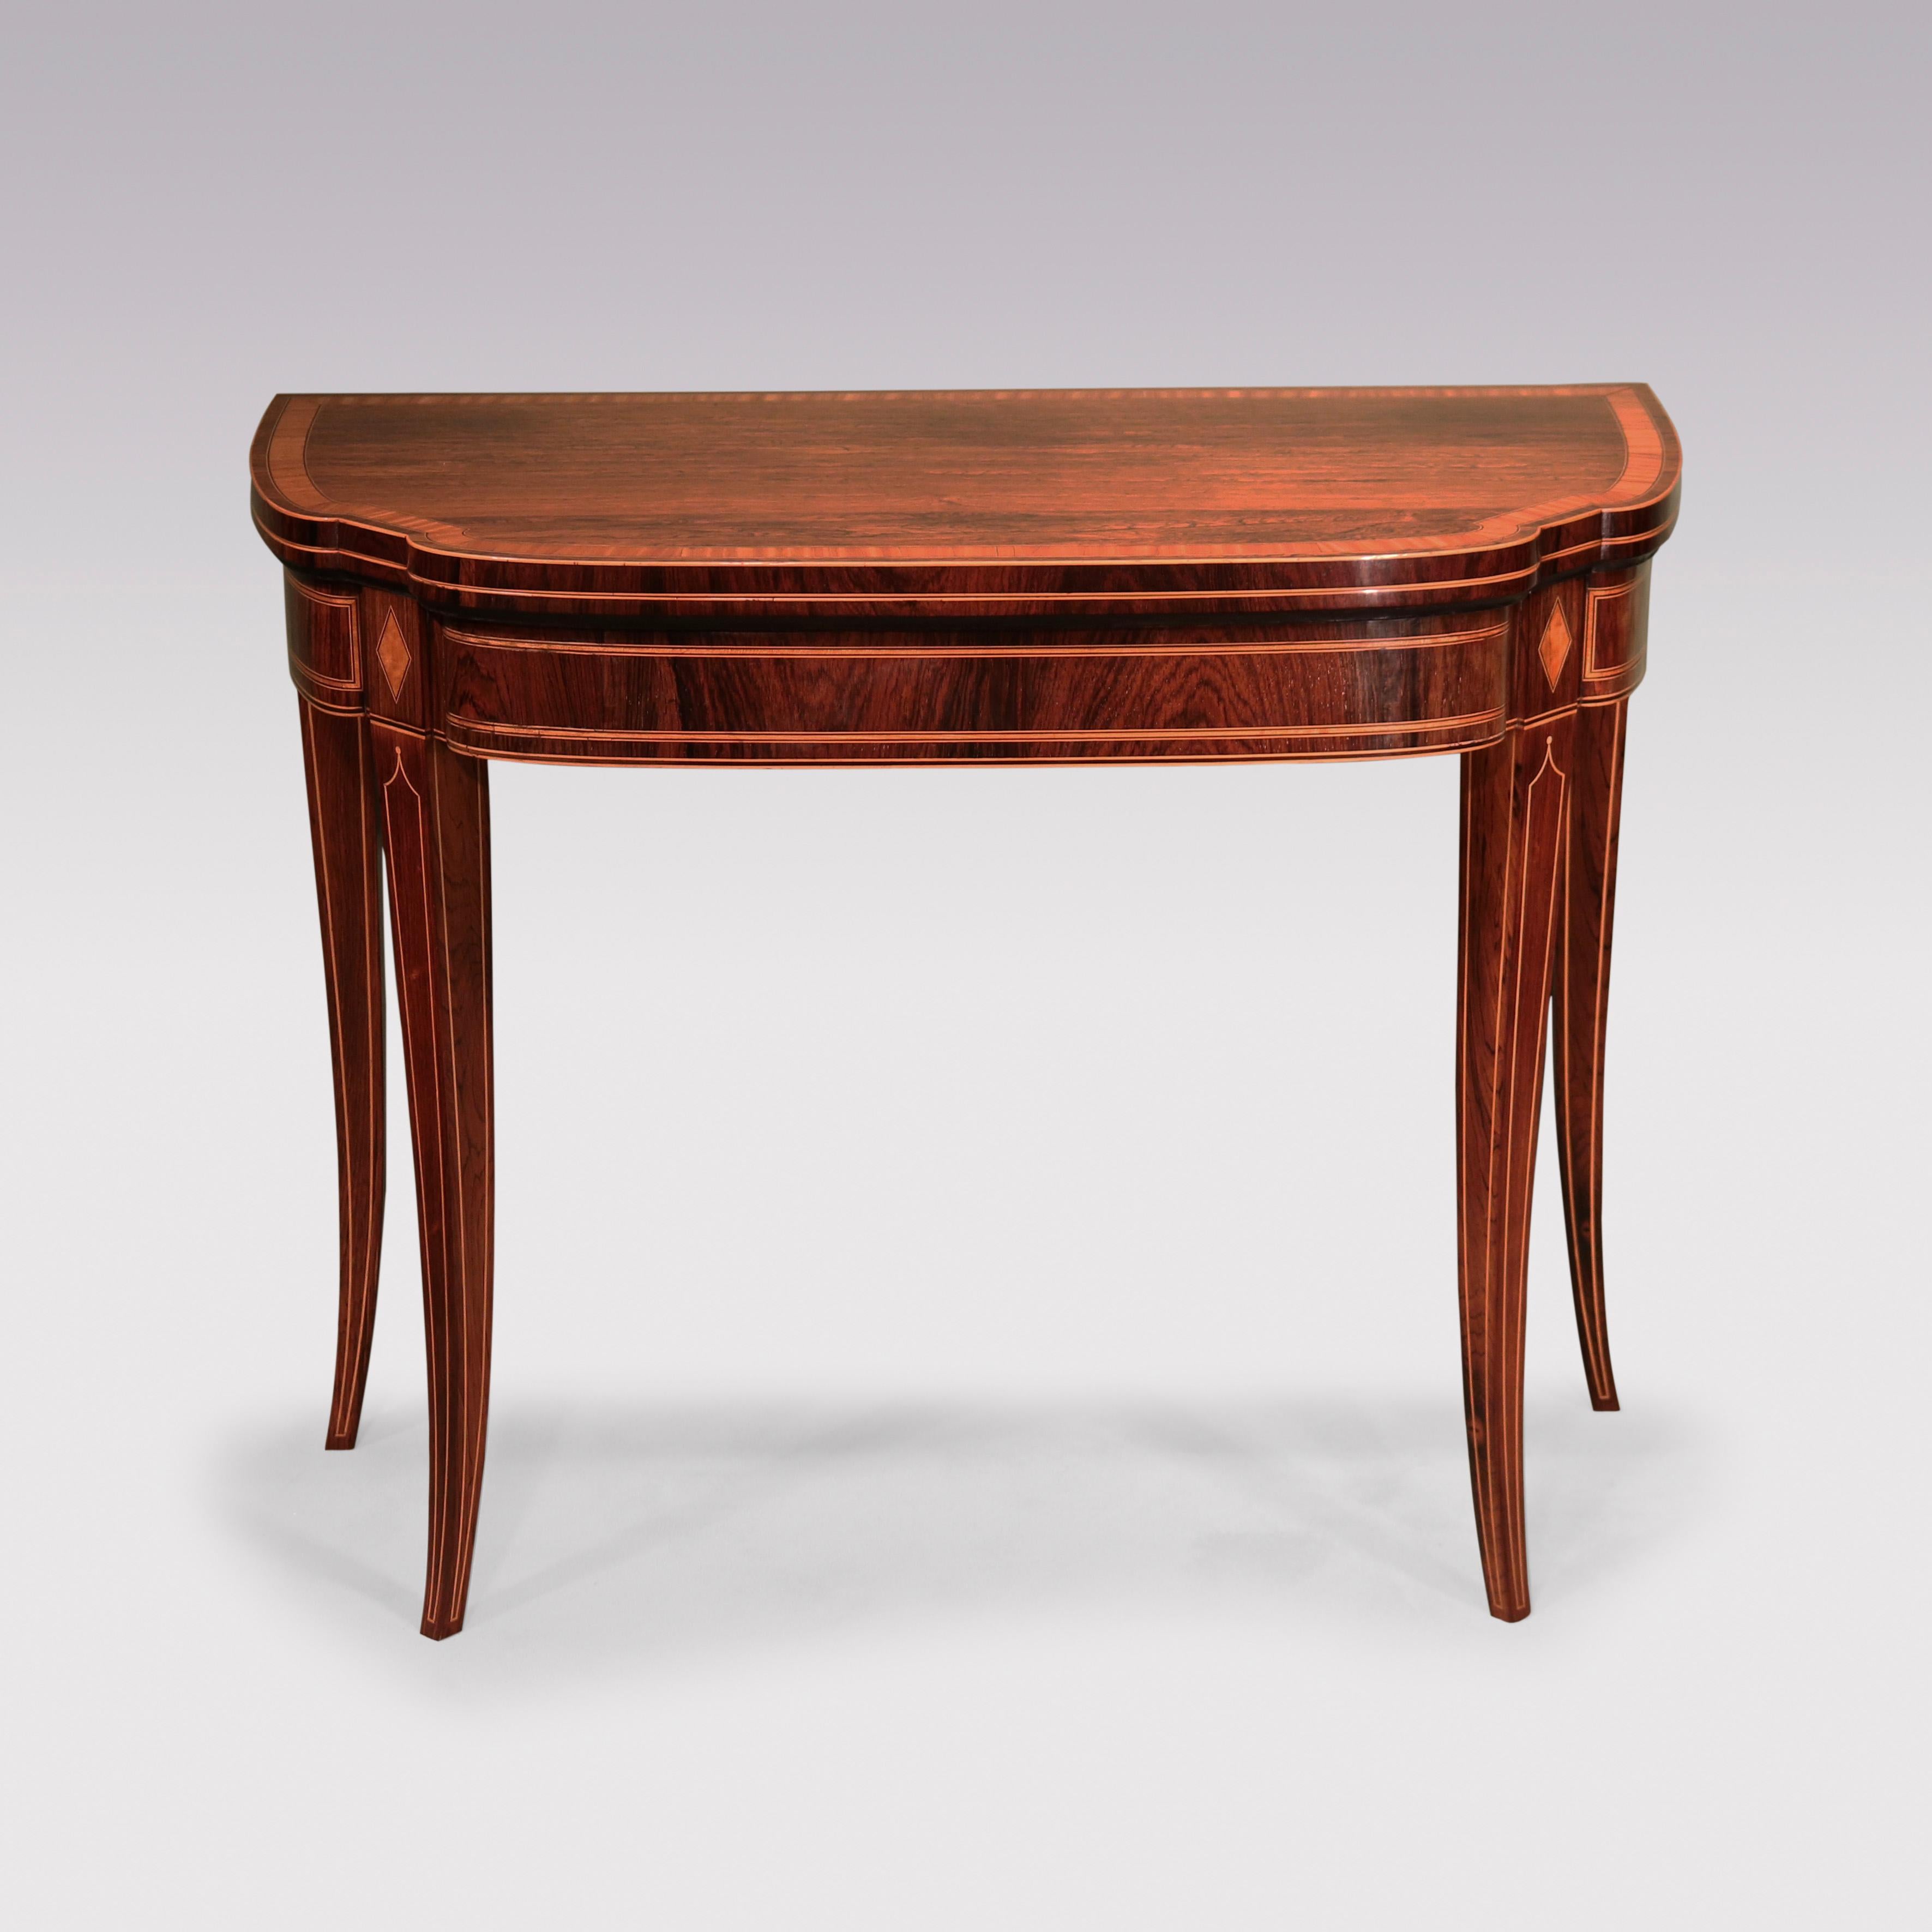 A fine quality Sheraton period rosewood Card Table, boxwood & ebony strung throughout, having unusual shaped satinwood crossbanded top above panelled frieze with diamond inlays supported on square tapering sabre legs.